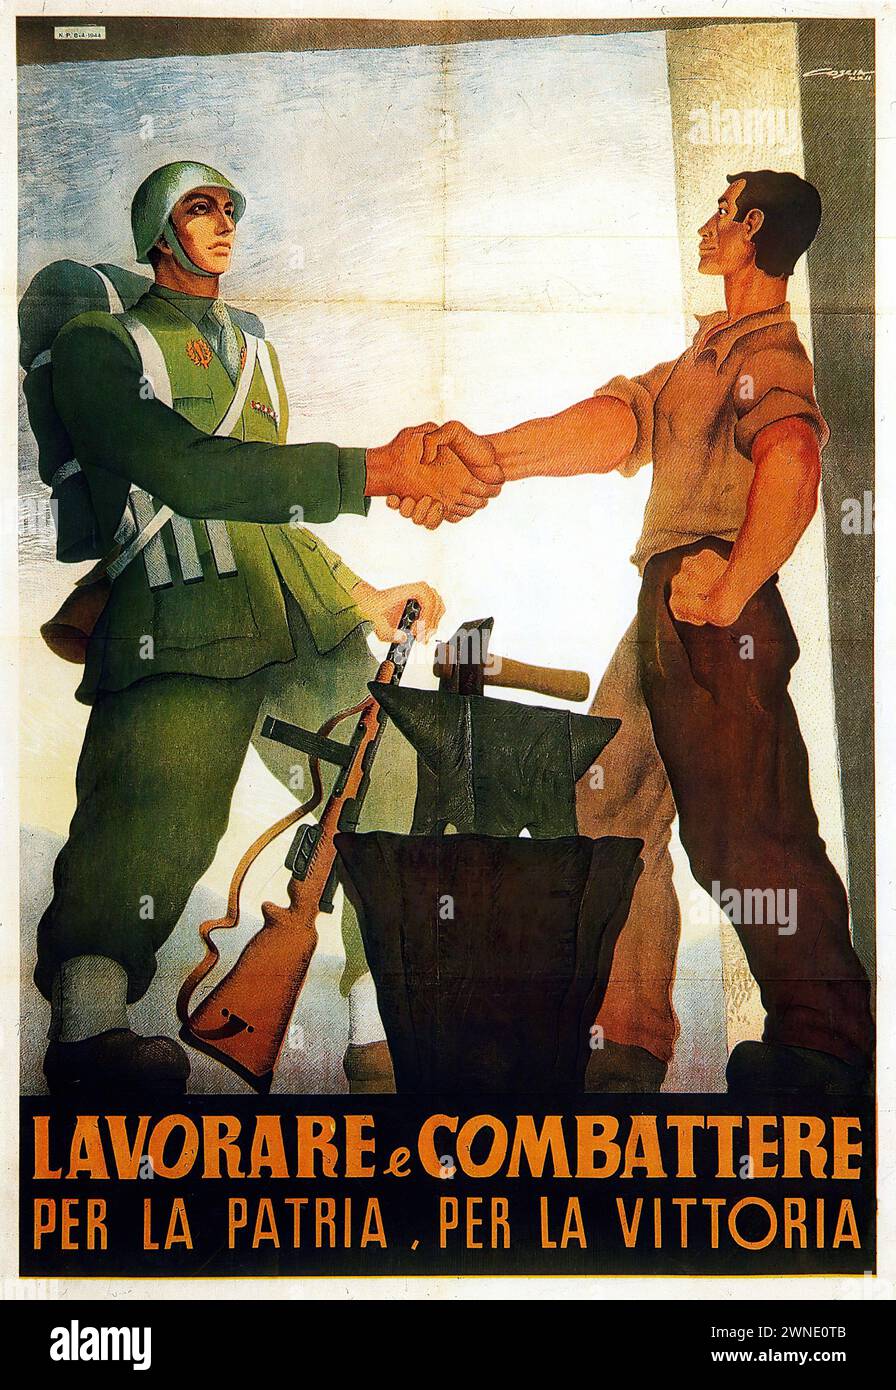 'LAVORARE e COMBATTERE PER LA PATRIA, PER LA VITTORIA' ['WORK and FIGHT FOR THE HOMELAND, FOR VICTORY'] 1944 vintage Italian propaganda poster, showing a soldier shaking hands with a worker, with tools and a rifle present. The style is forceful and patriotic, with strong figures and a muted color palette, typical of World War II era propaganda. Stock Photo